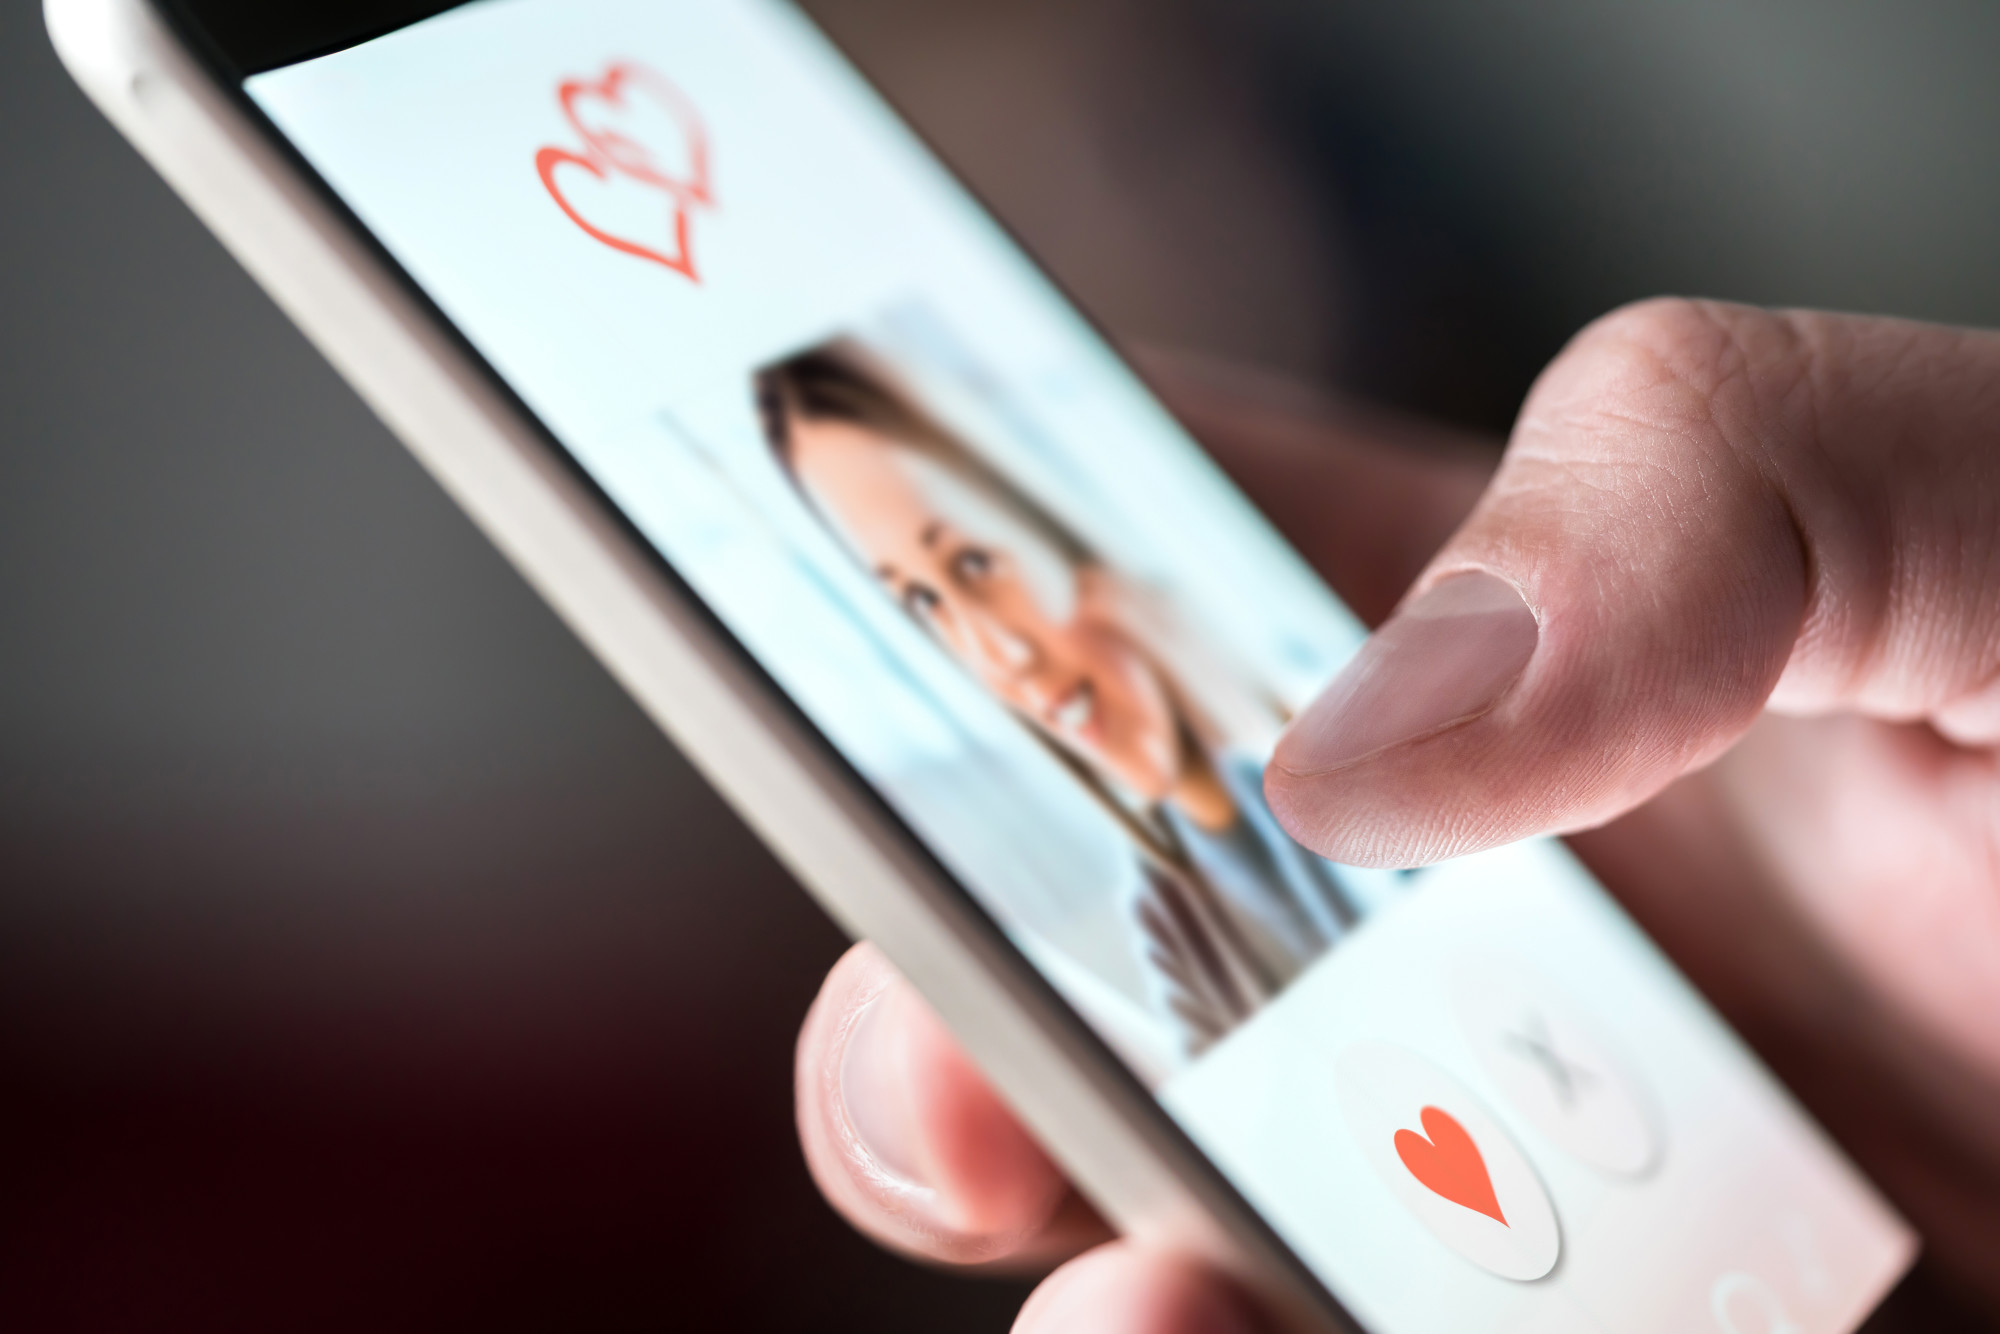 Your Guide to Using Dating Apps While Social Distancing - Tech Stuffed